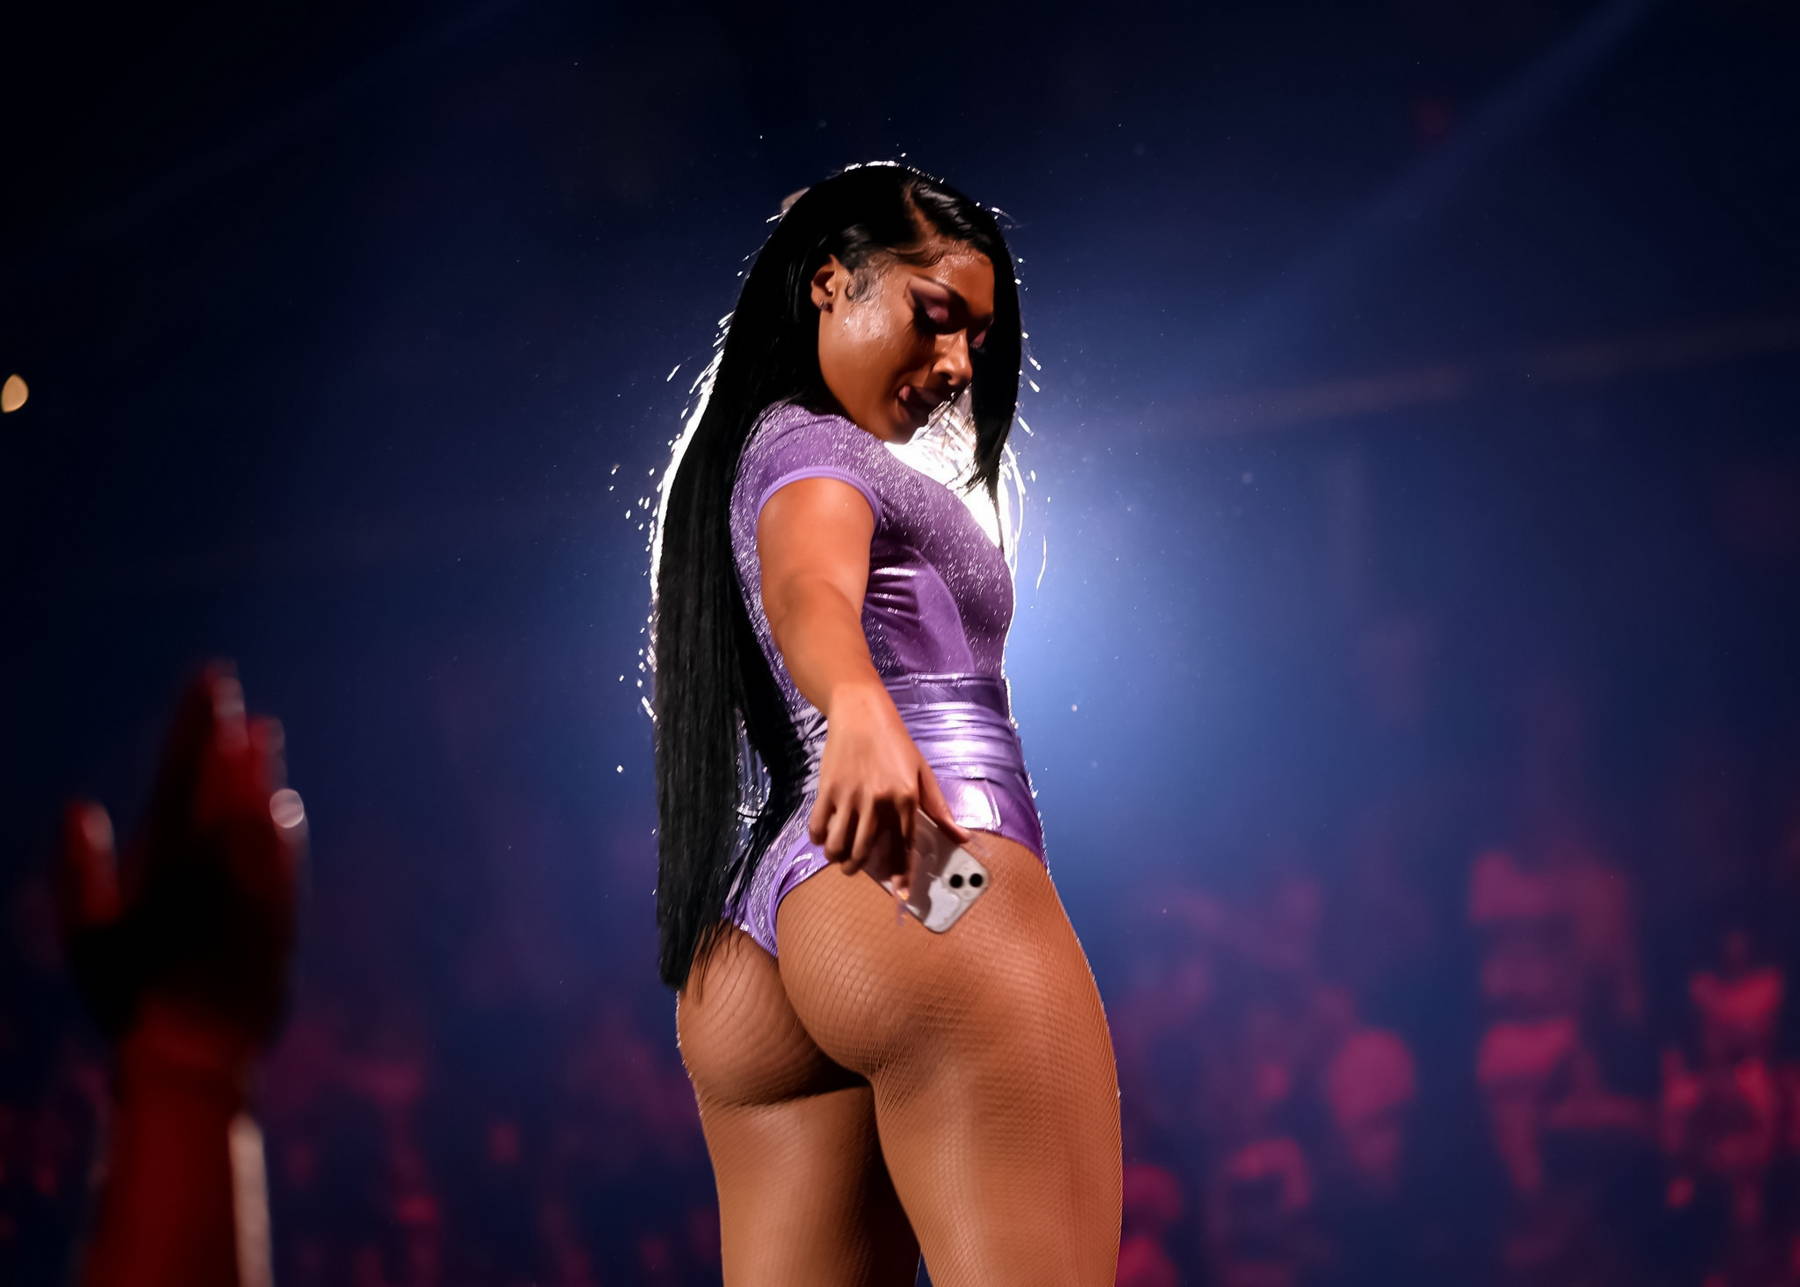 megan thee stallion performs live during the 2022 iheartradio music festiva...